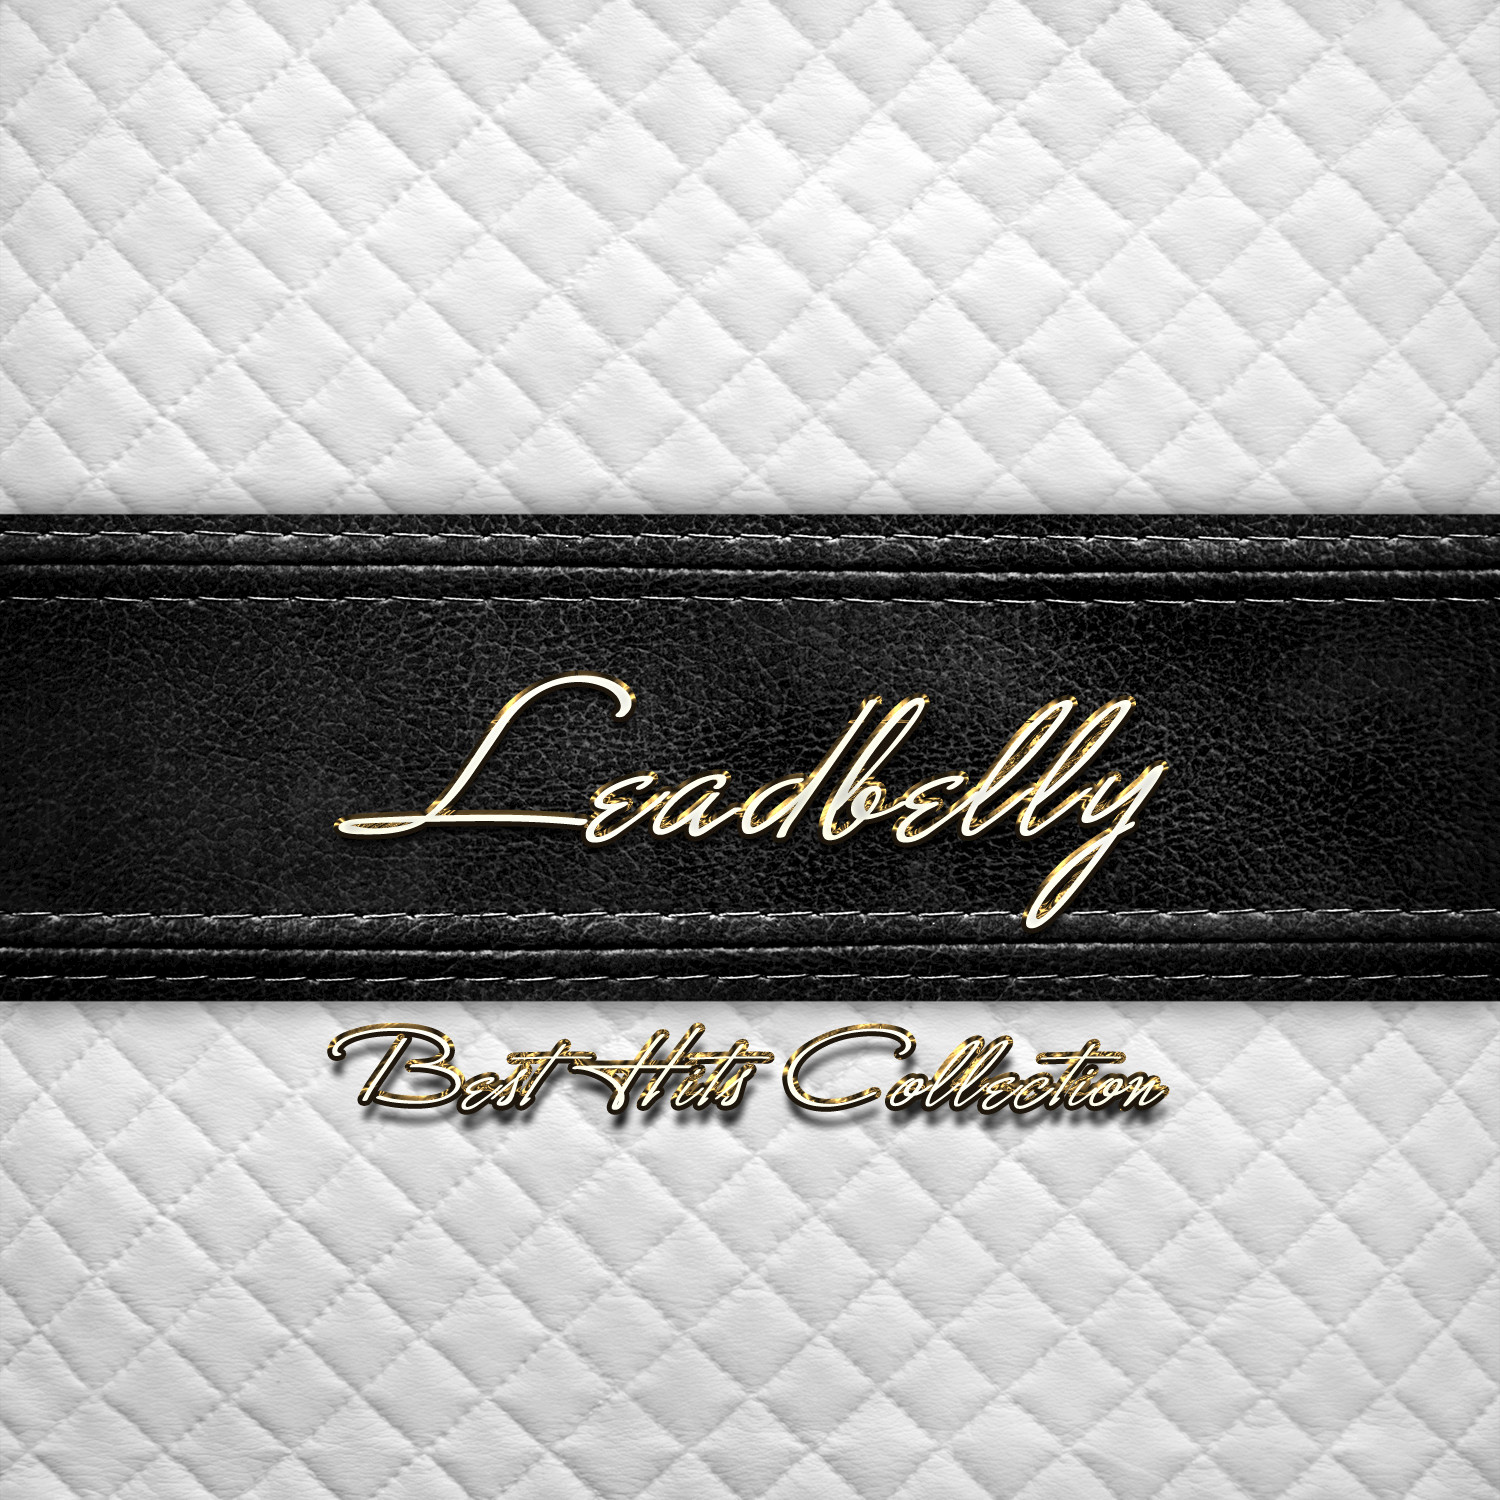 Best Hits Collection of Leadbelly